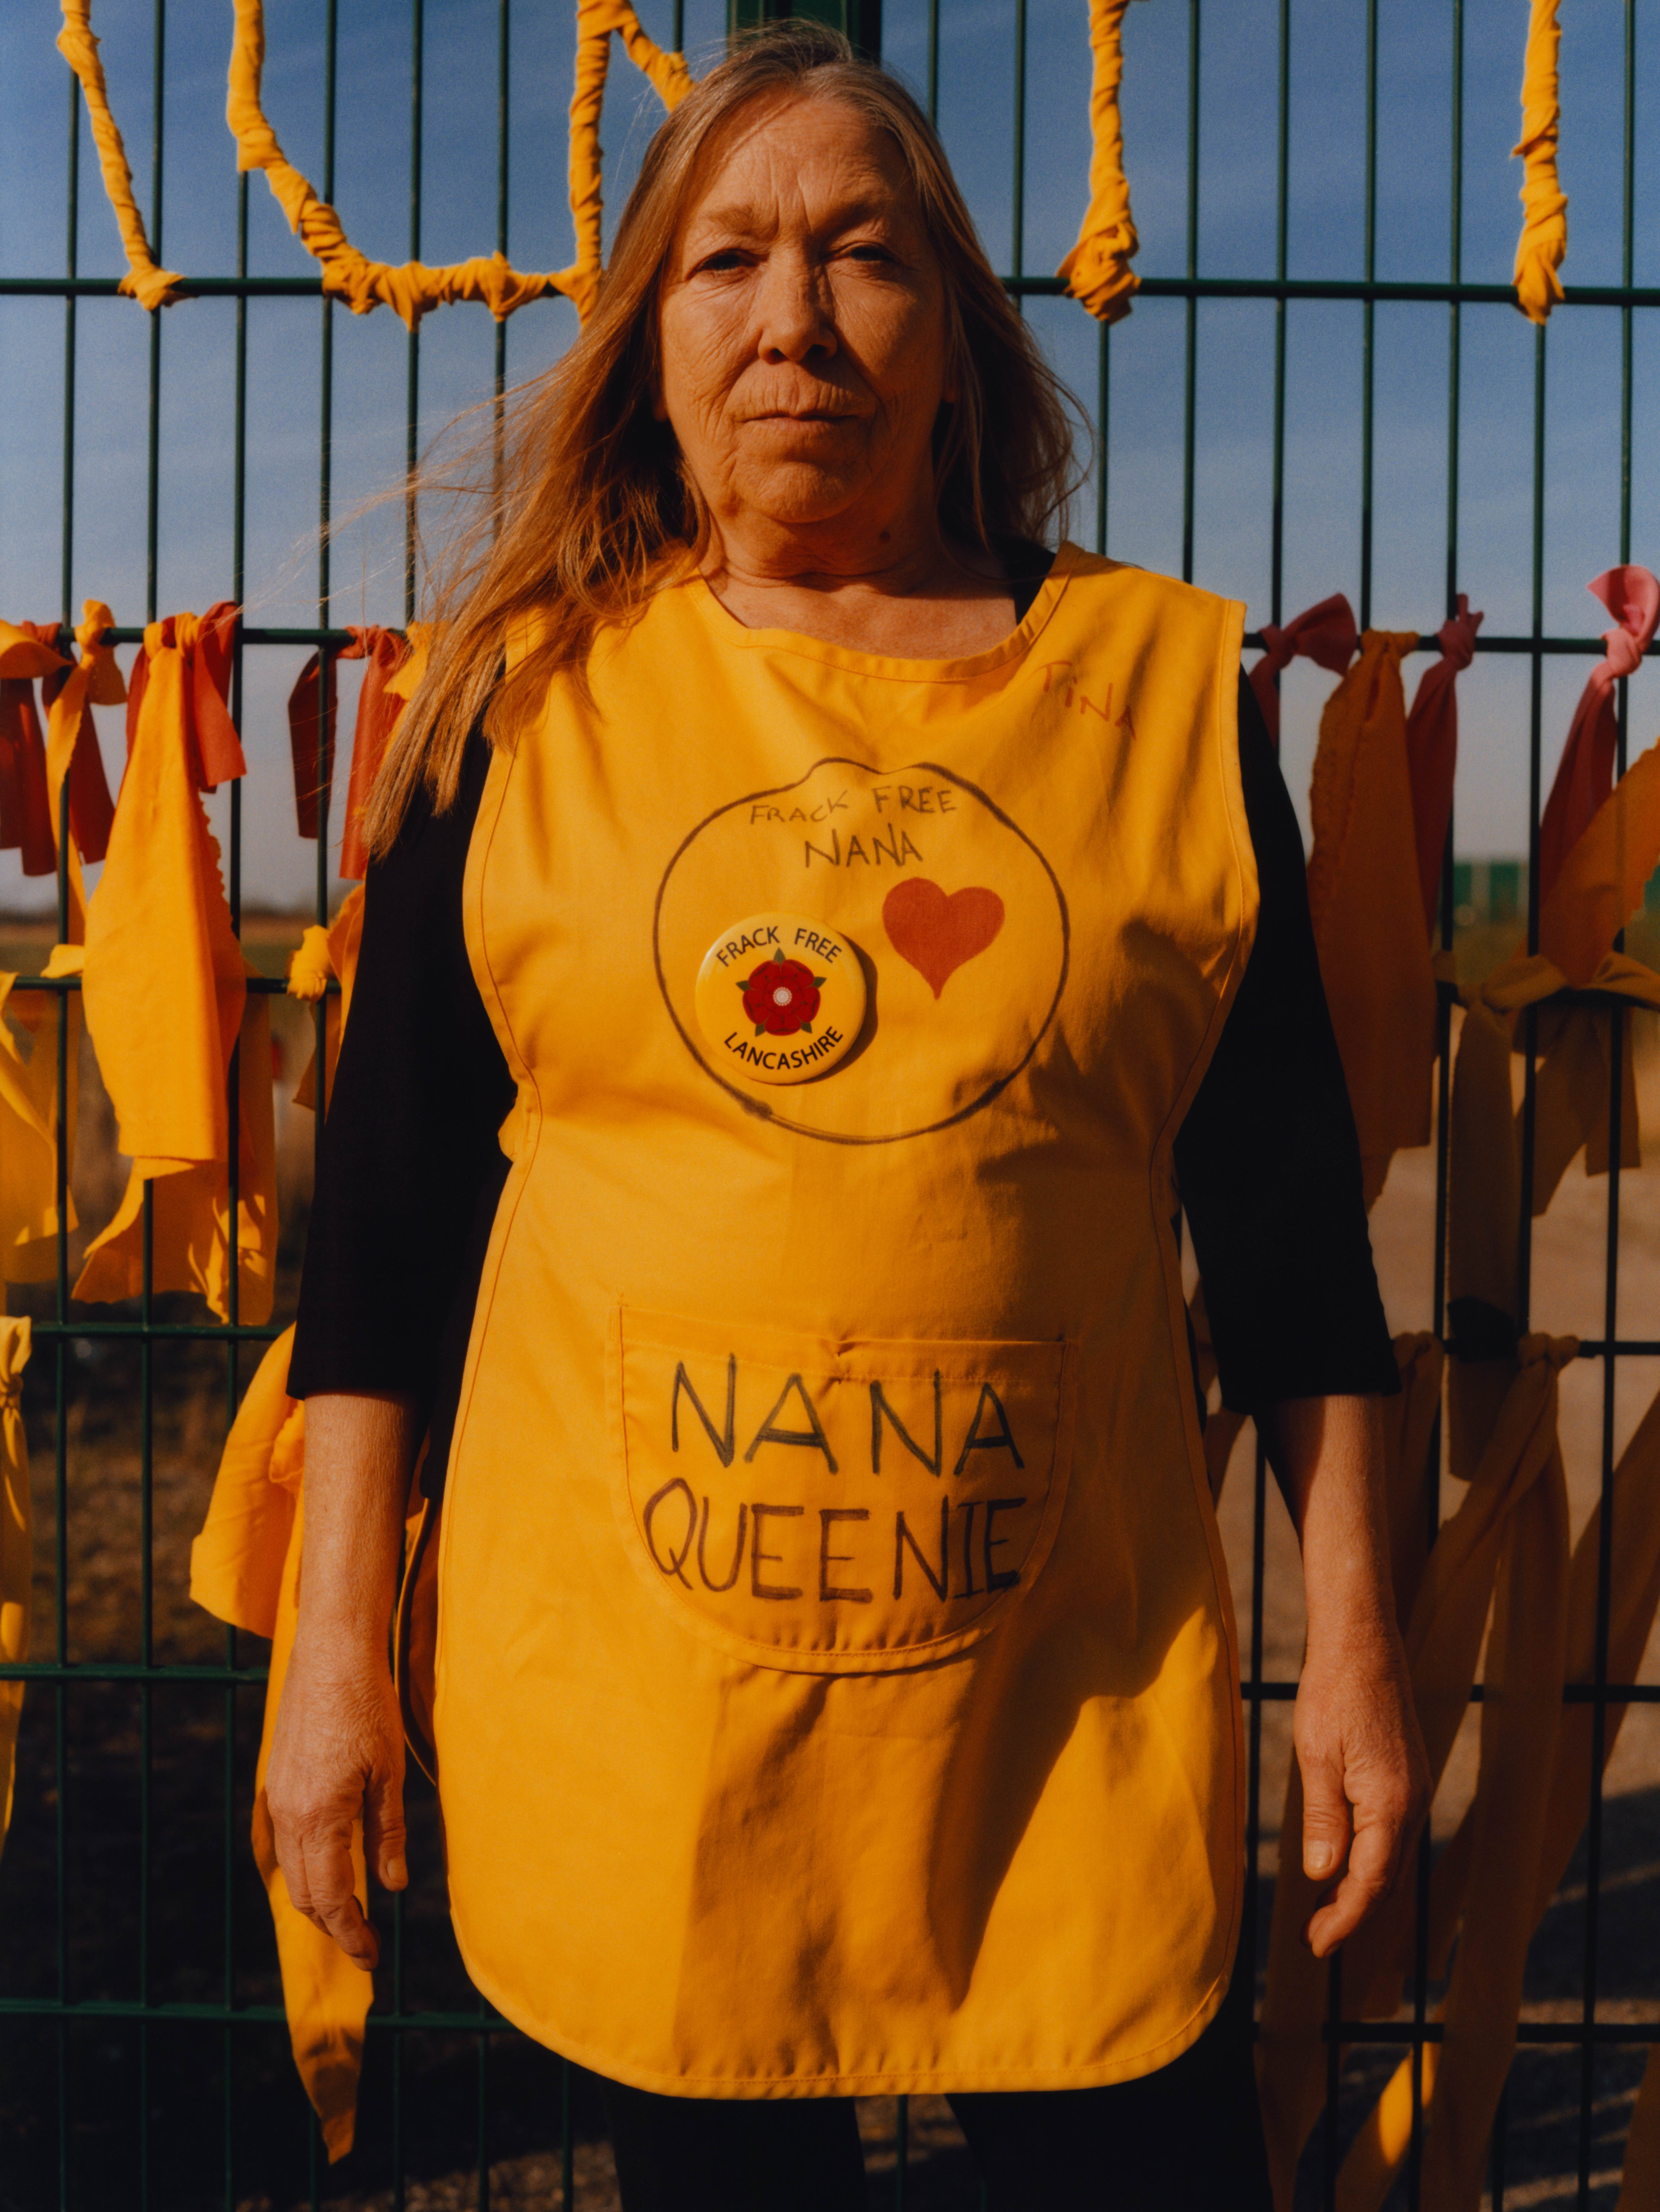 A portrait of Tina Rothery, an older woman with long, straight strawberry blonde hair, wearing a yellow tabard and standing in front of a fence with yellow ribbons tied across it. 